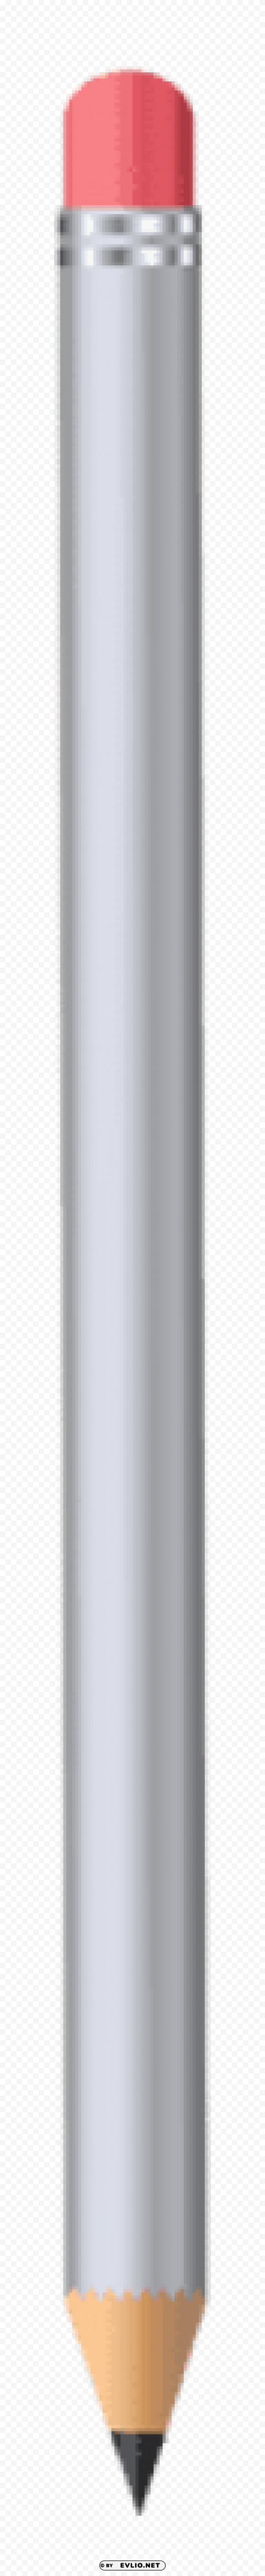 silver pencil Isolated Subject on HighQuality PNG